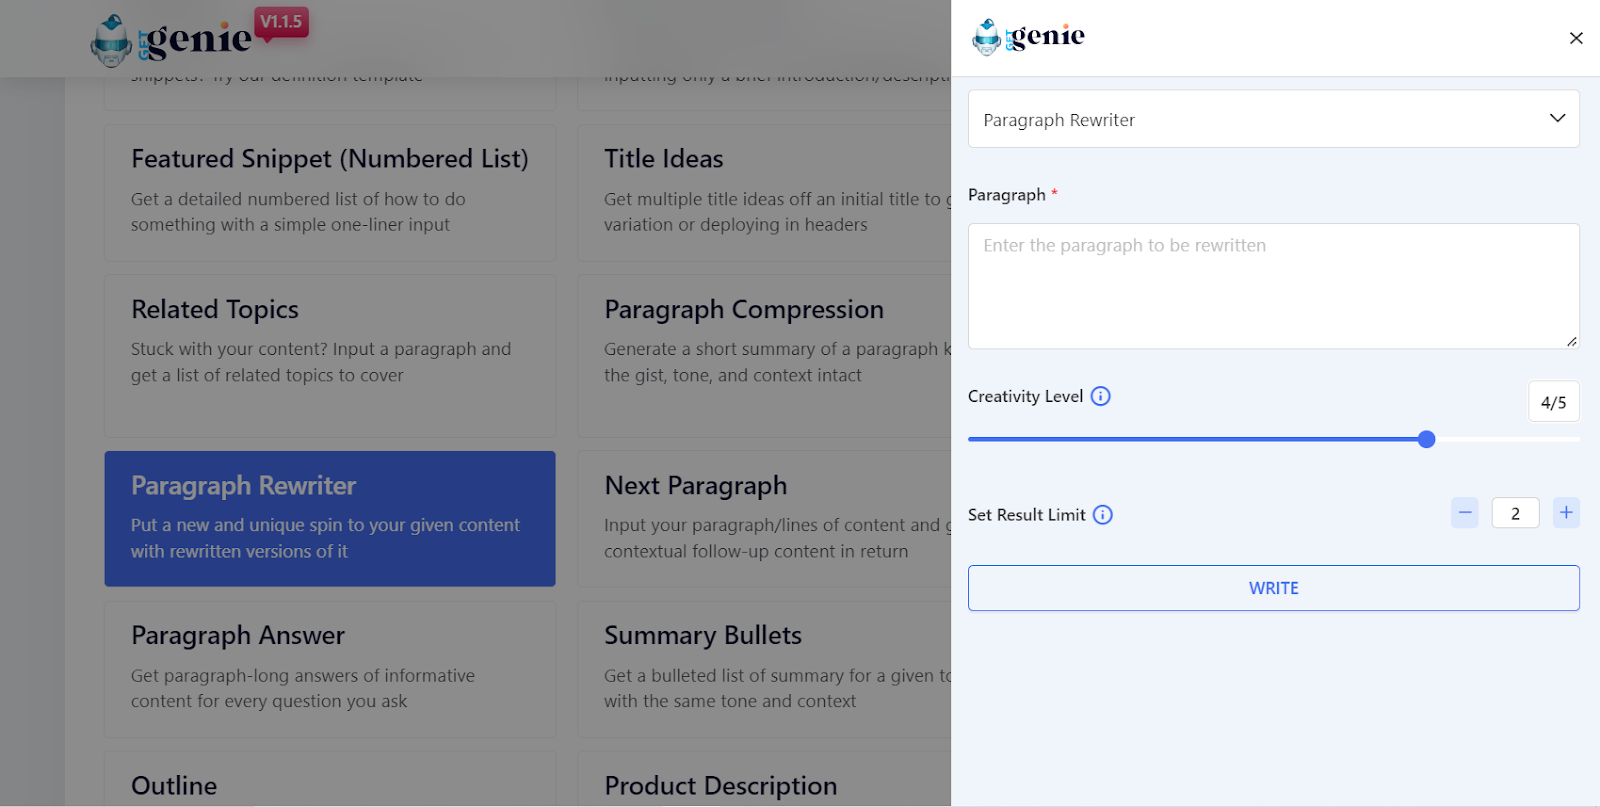 GetGenie AI writing assistant offers 30+ useful templates.